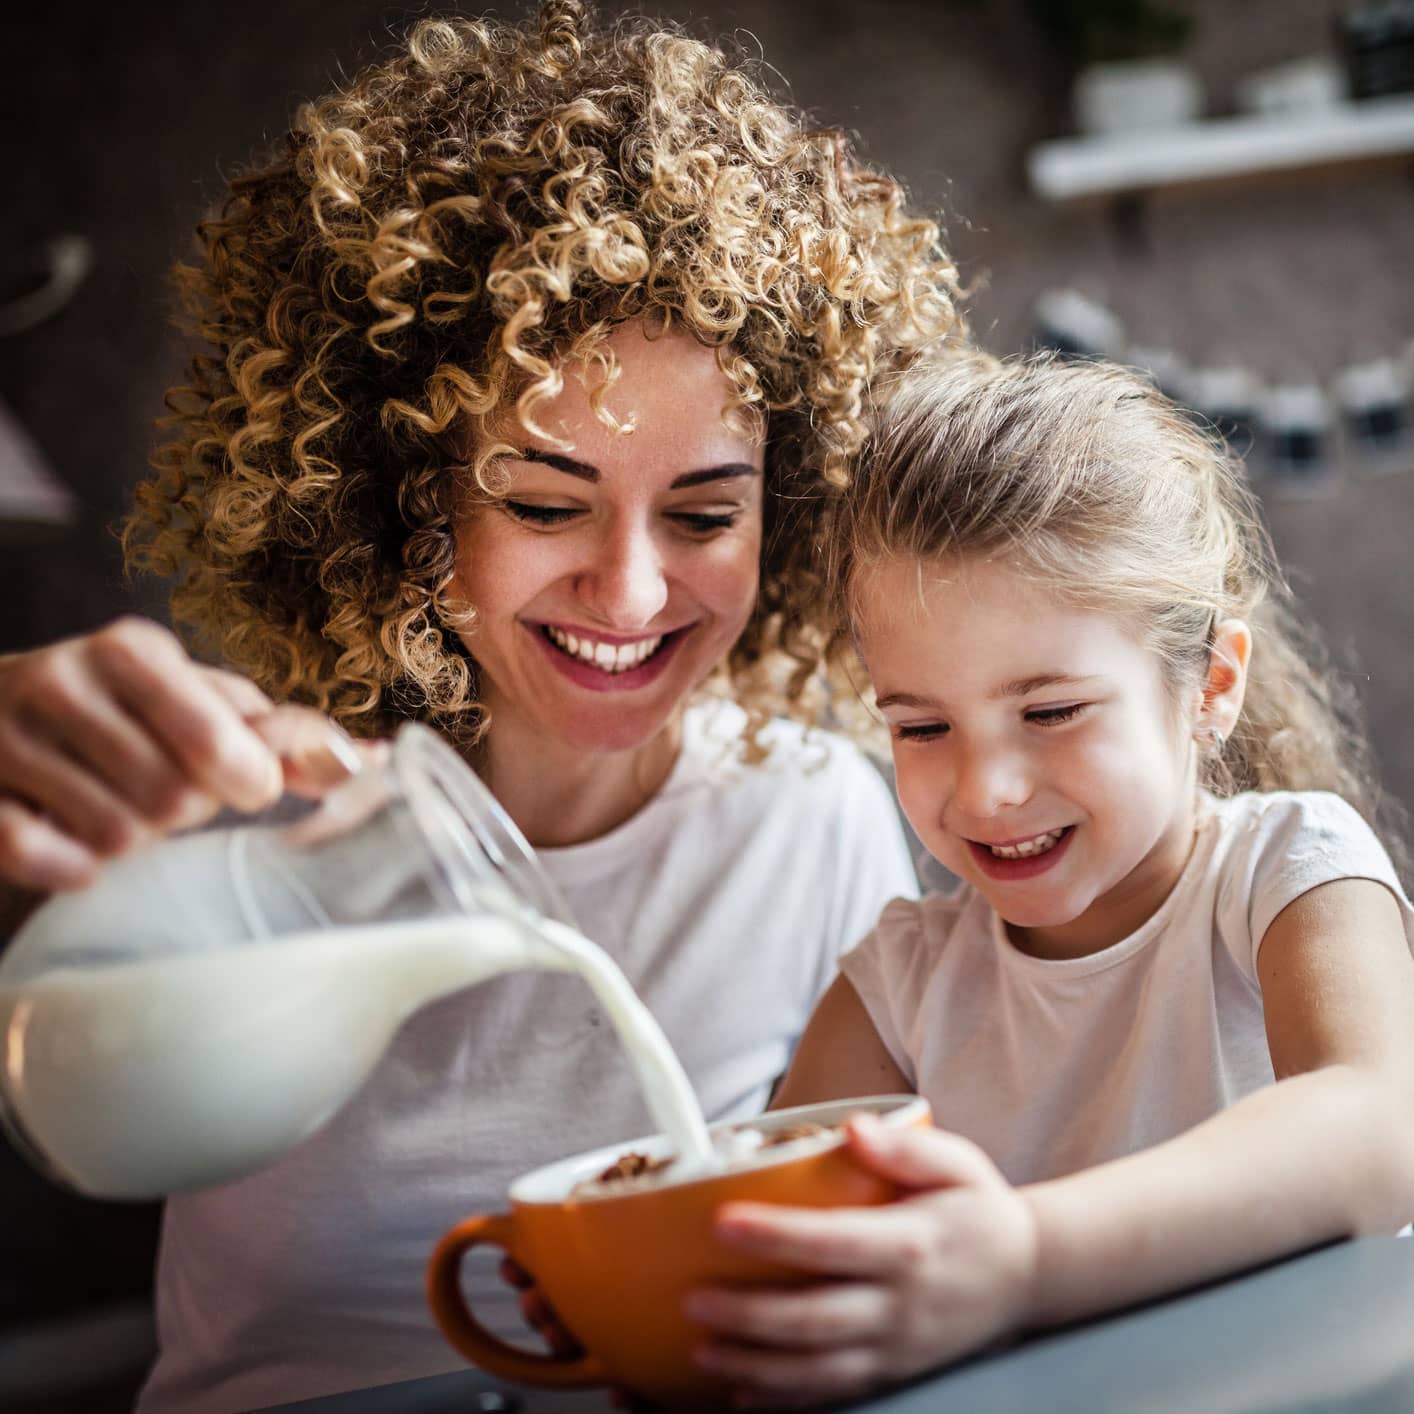 mom pours milk into cereal bowl for daughter